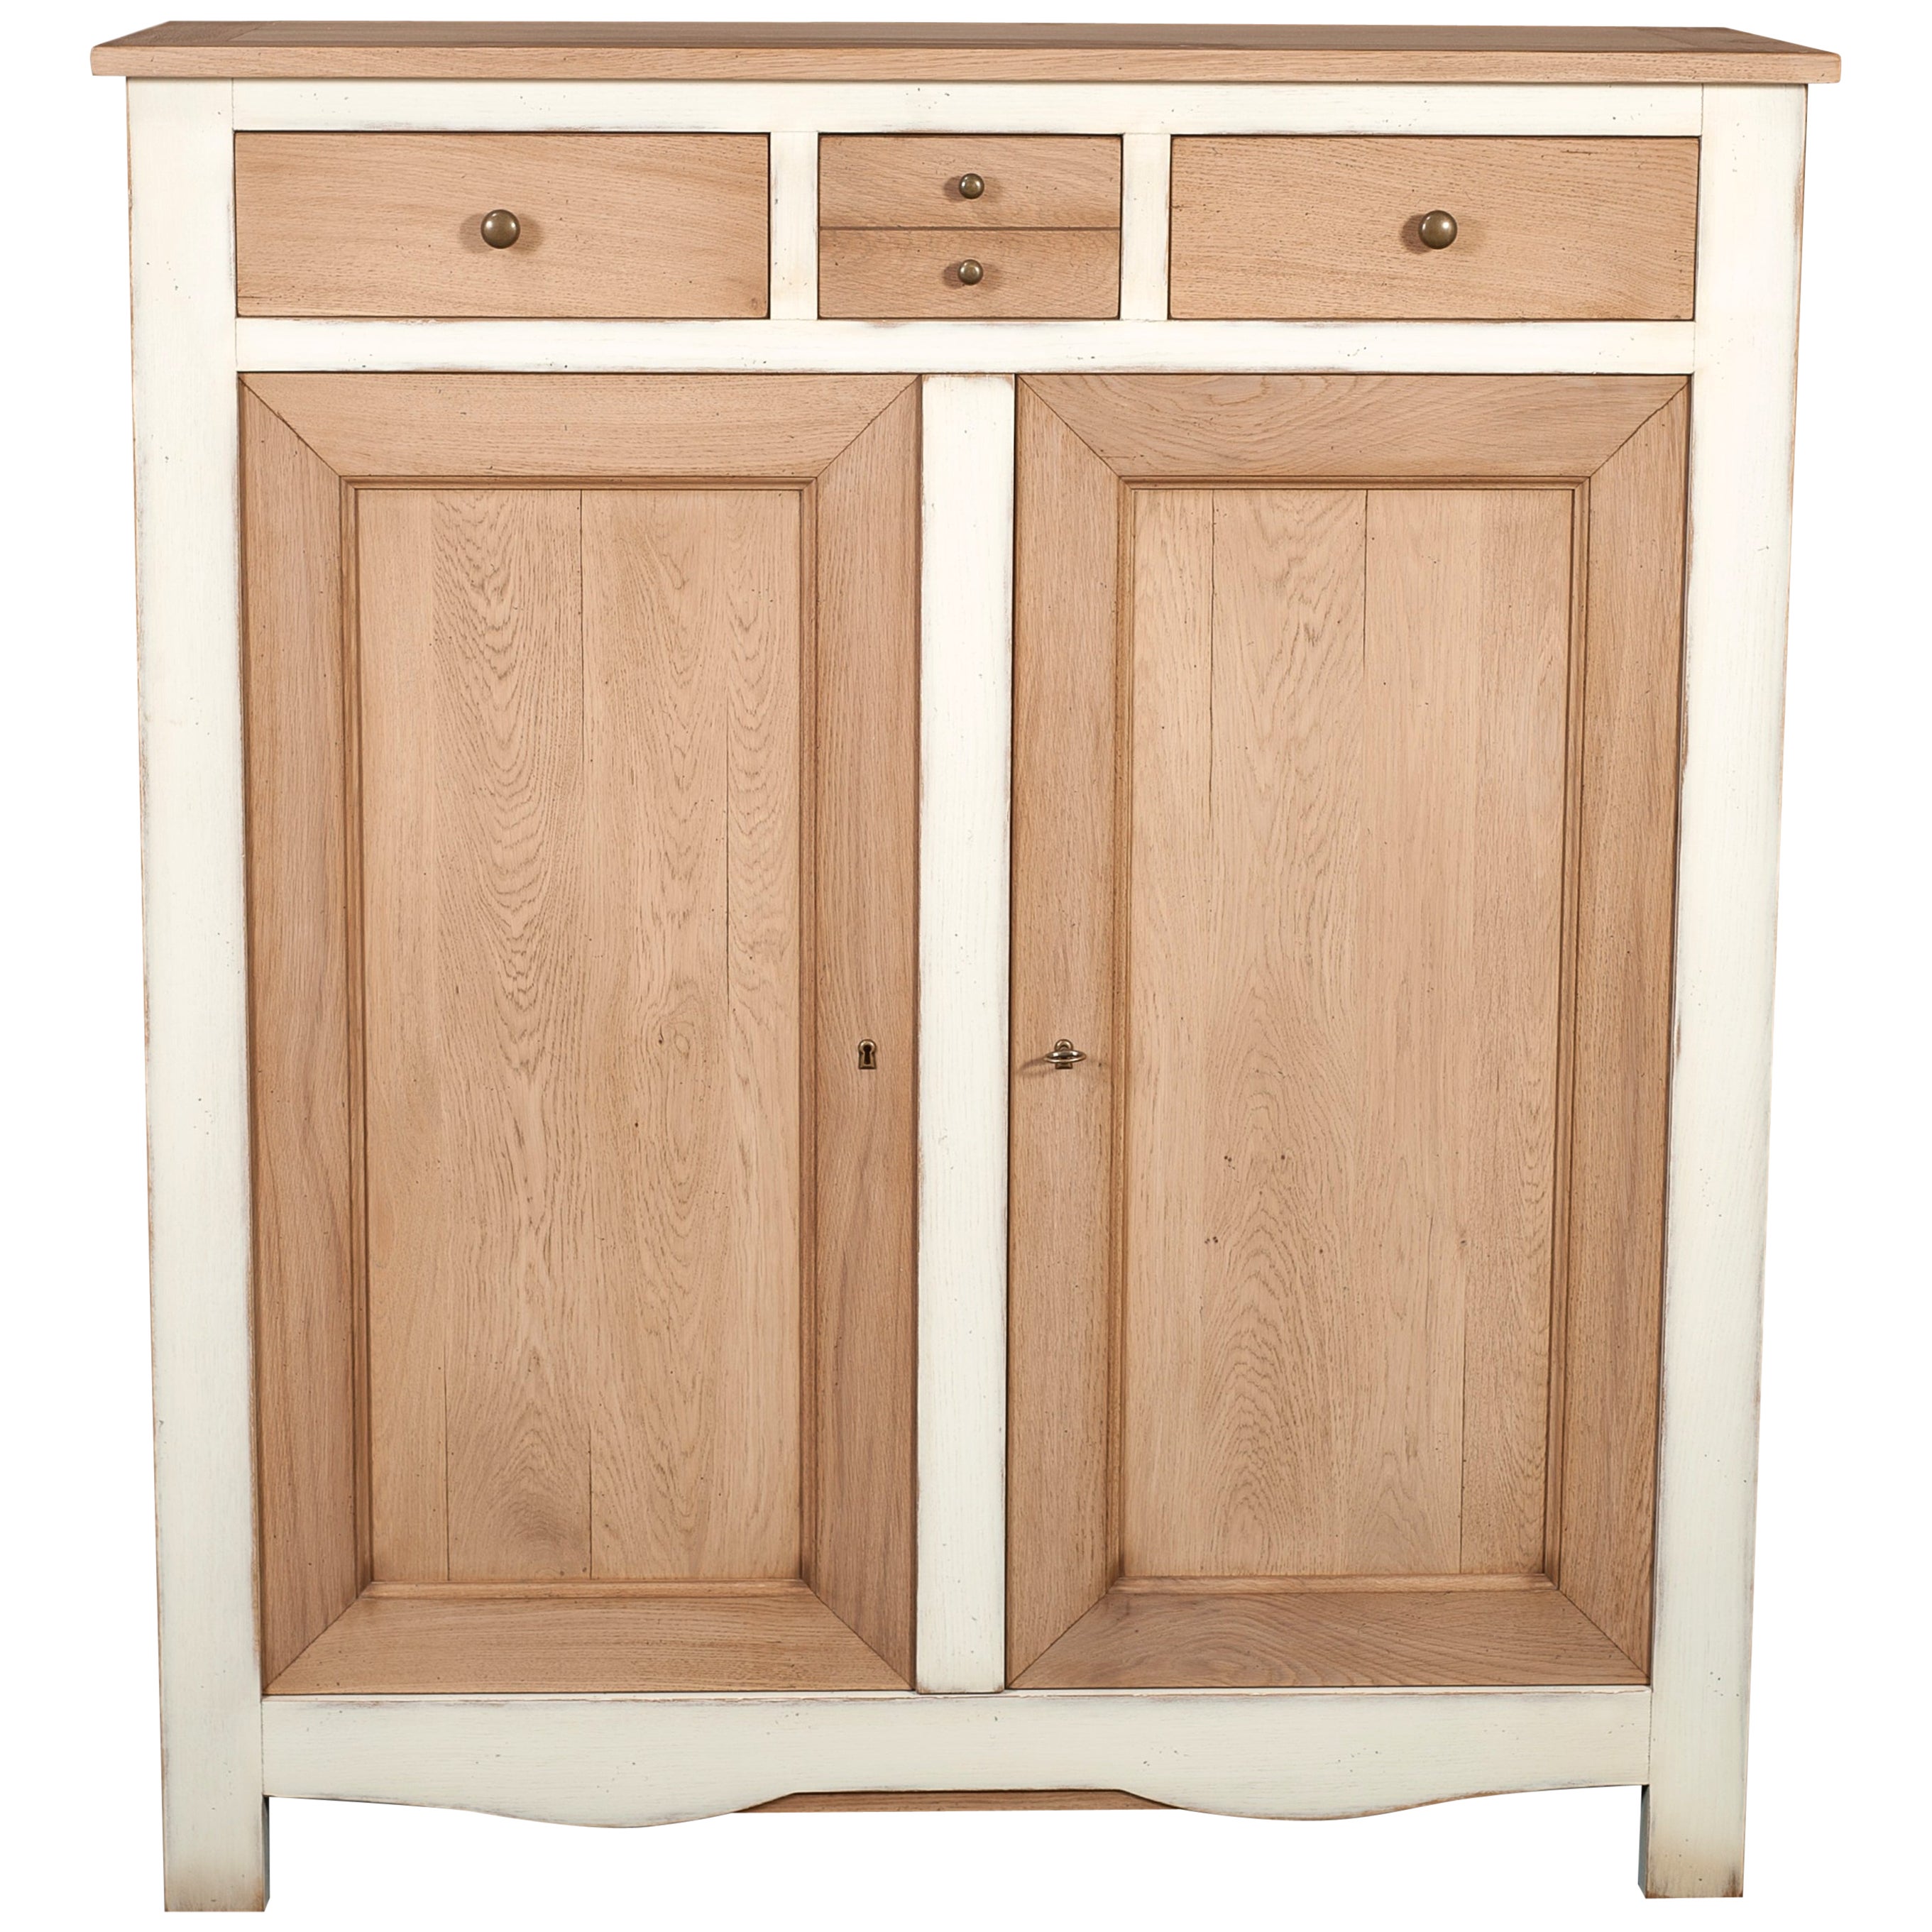 French Handcrafted Cabinet in Solid Oak, Chestnut Oak Stained, Satin Polished For Sale